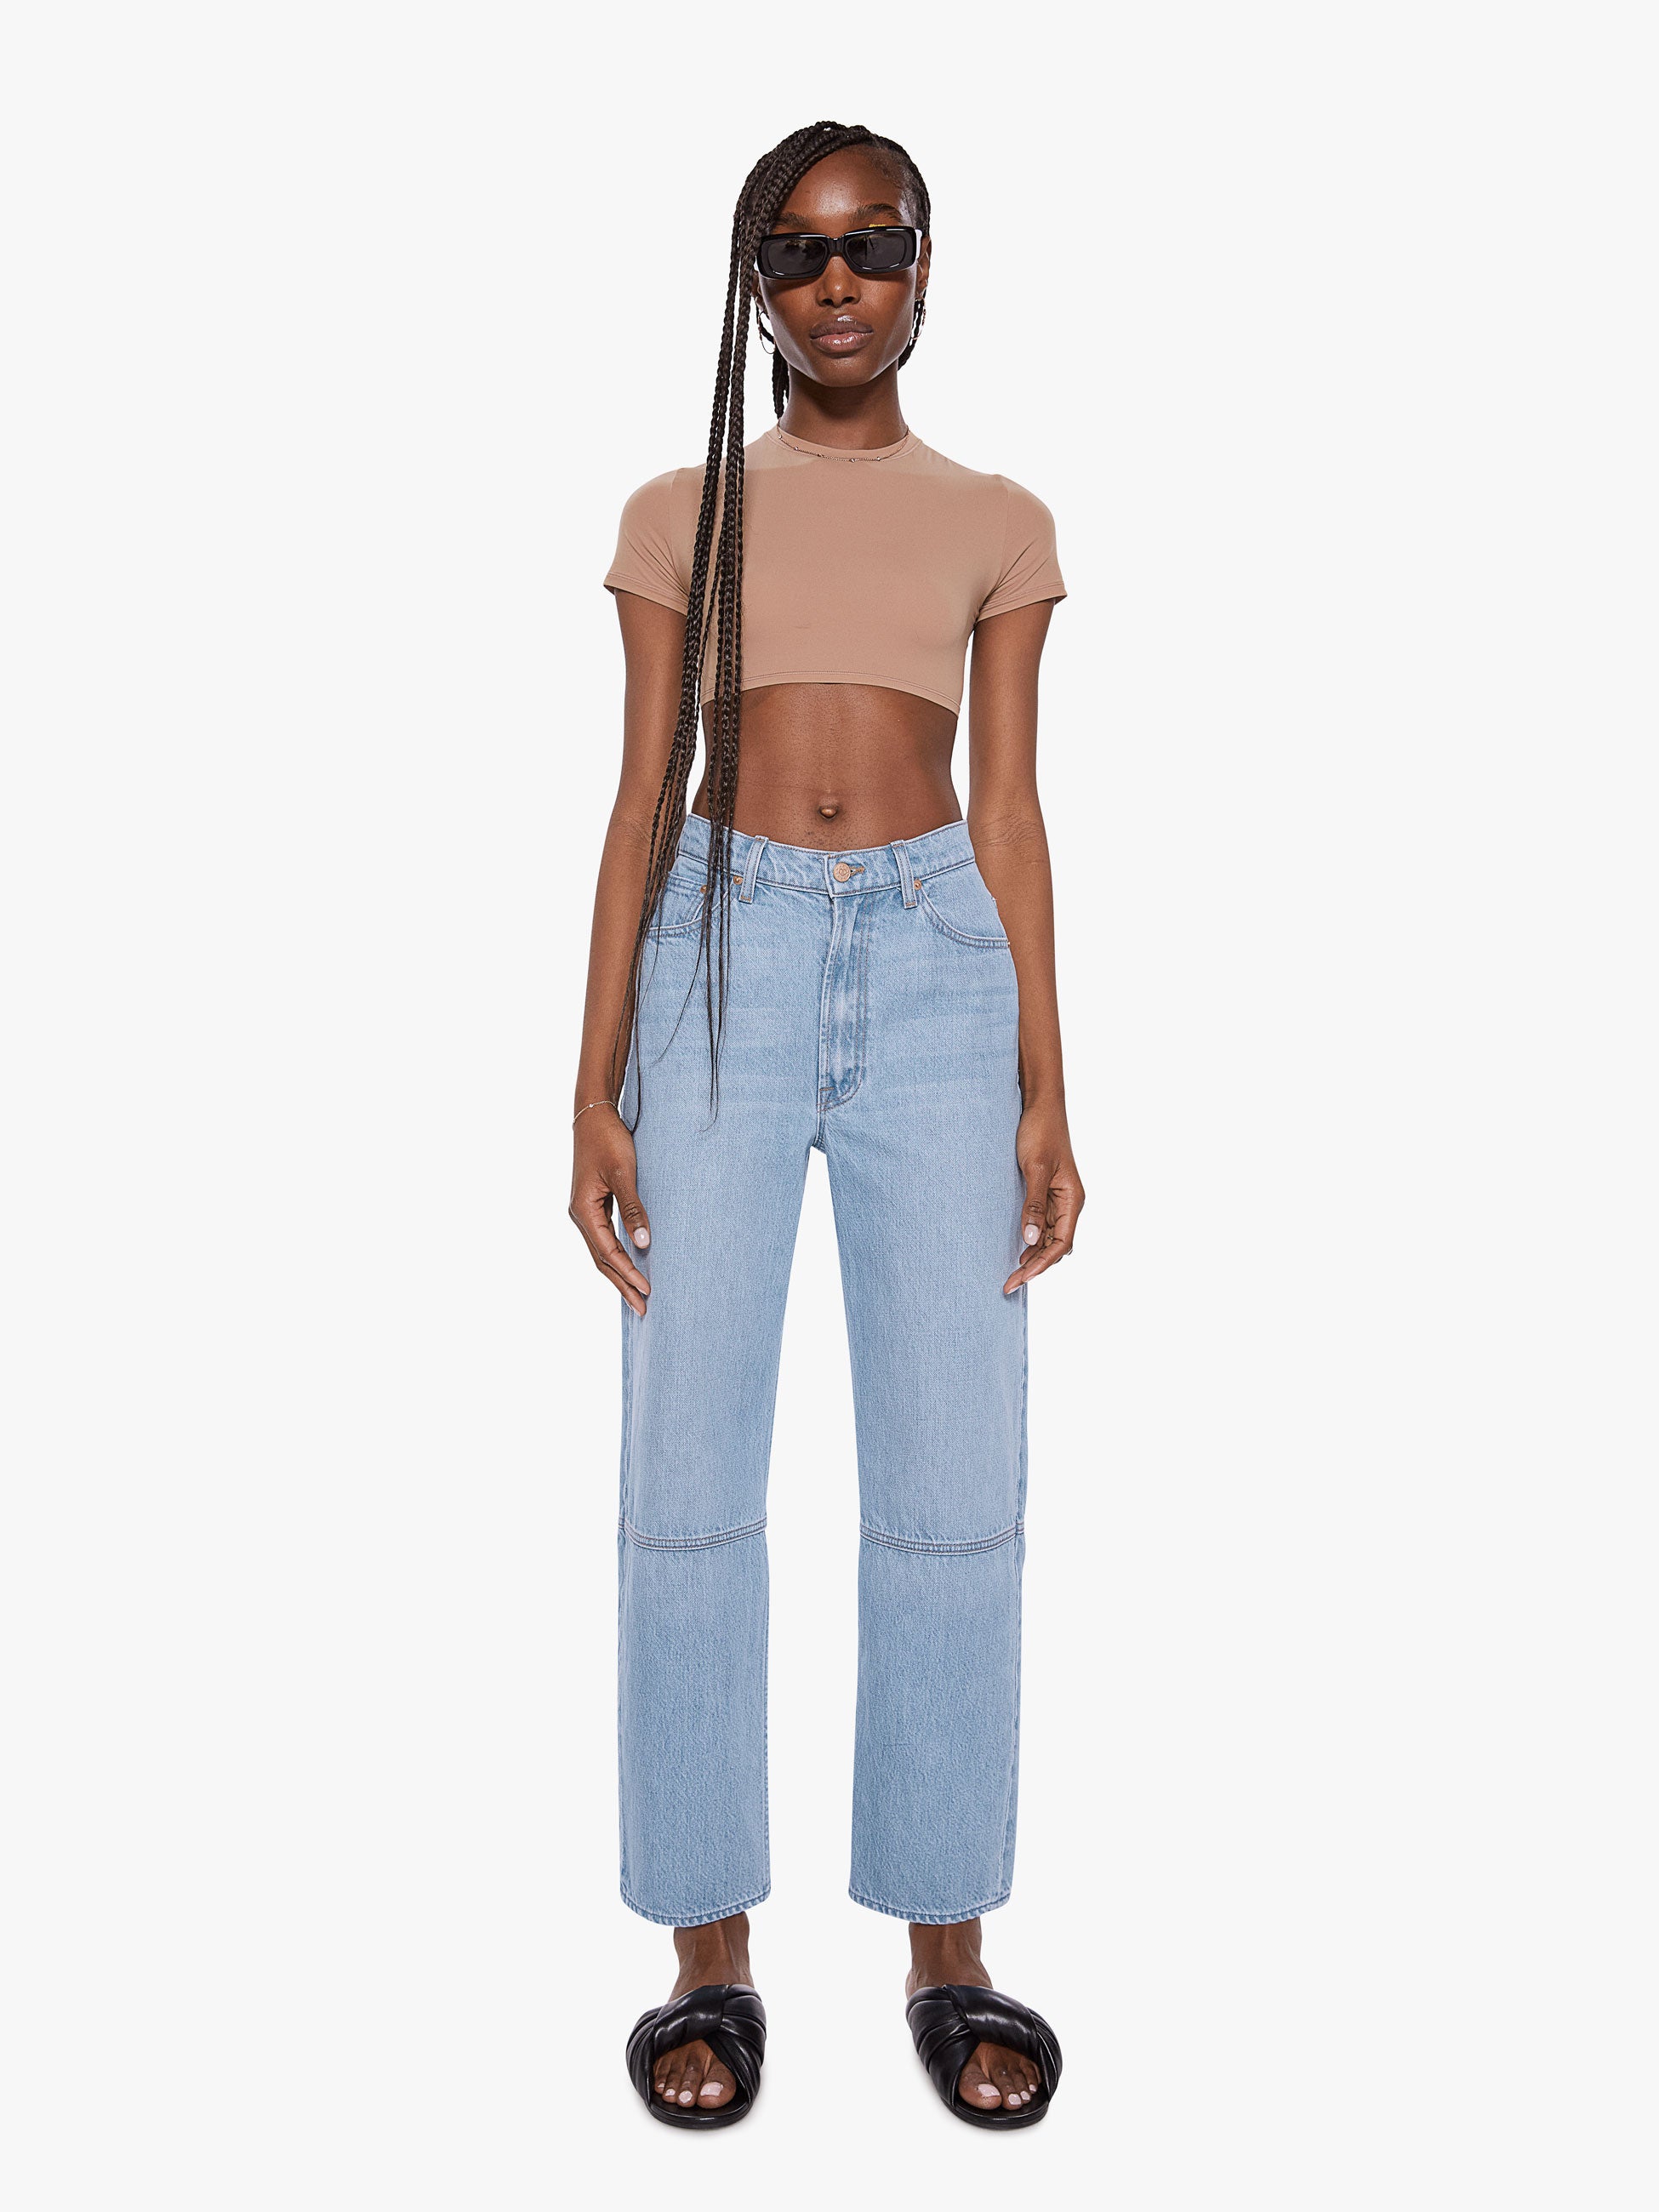 SNACKS! HIGH WAISTED DOUBLE STACK SEAMED ANKLE JUST A NIBBLE | MOTHER DENIM